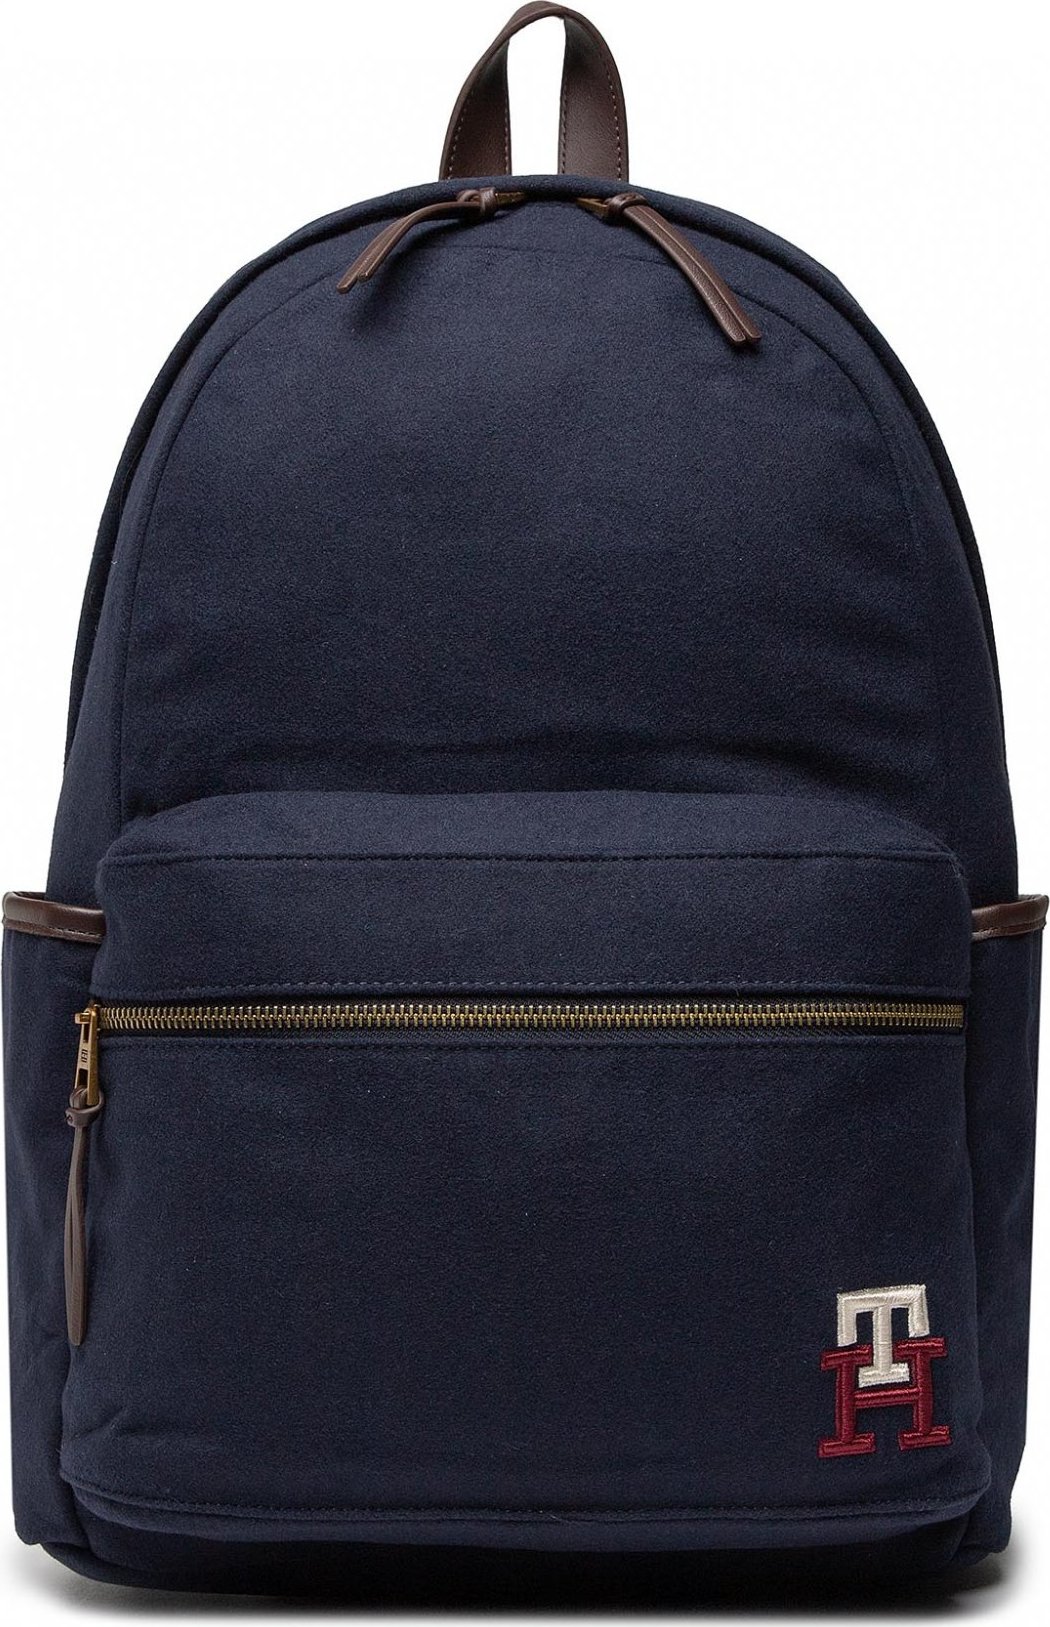 TOMMY HILFIGER New Prep Backpack AM0AM10290